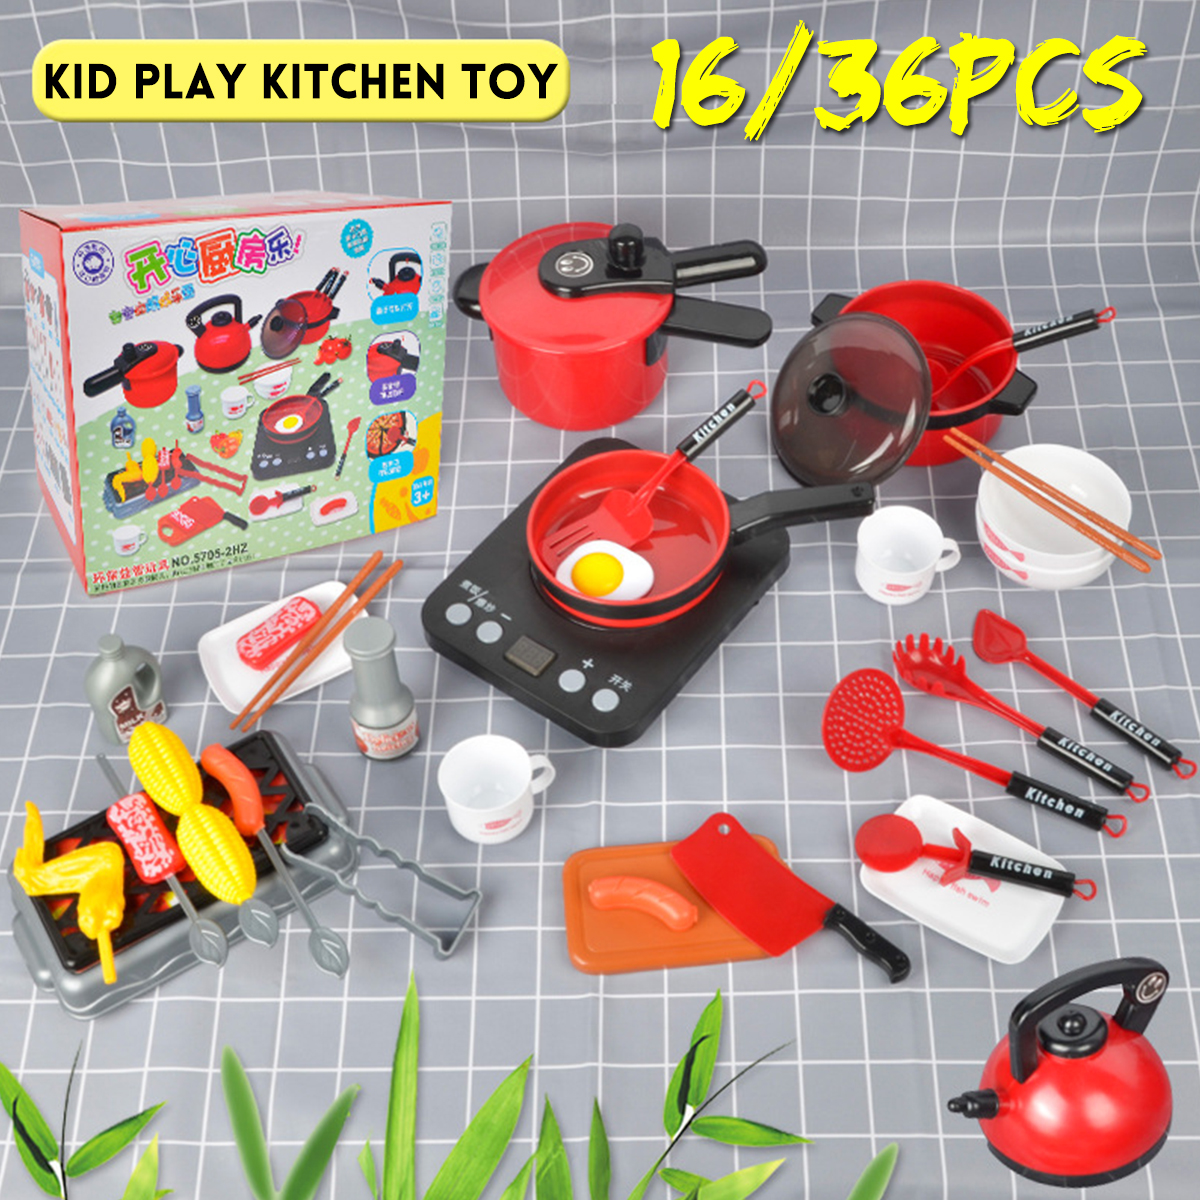 1636-Pcs-Kid-Play-House-Toy-ABS-Plastic-Kitchen-Cooking-Pots-Pans-Food-Dishes-Cookware-Toys-1627711-1